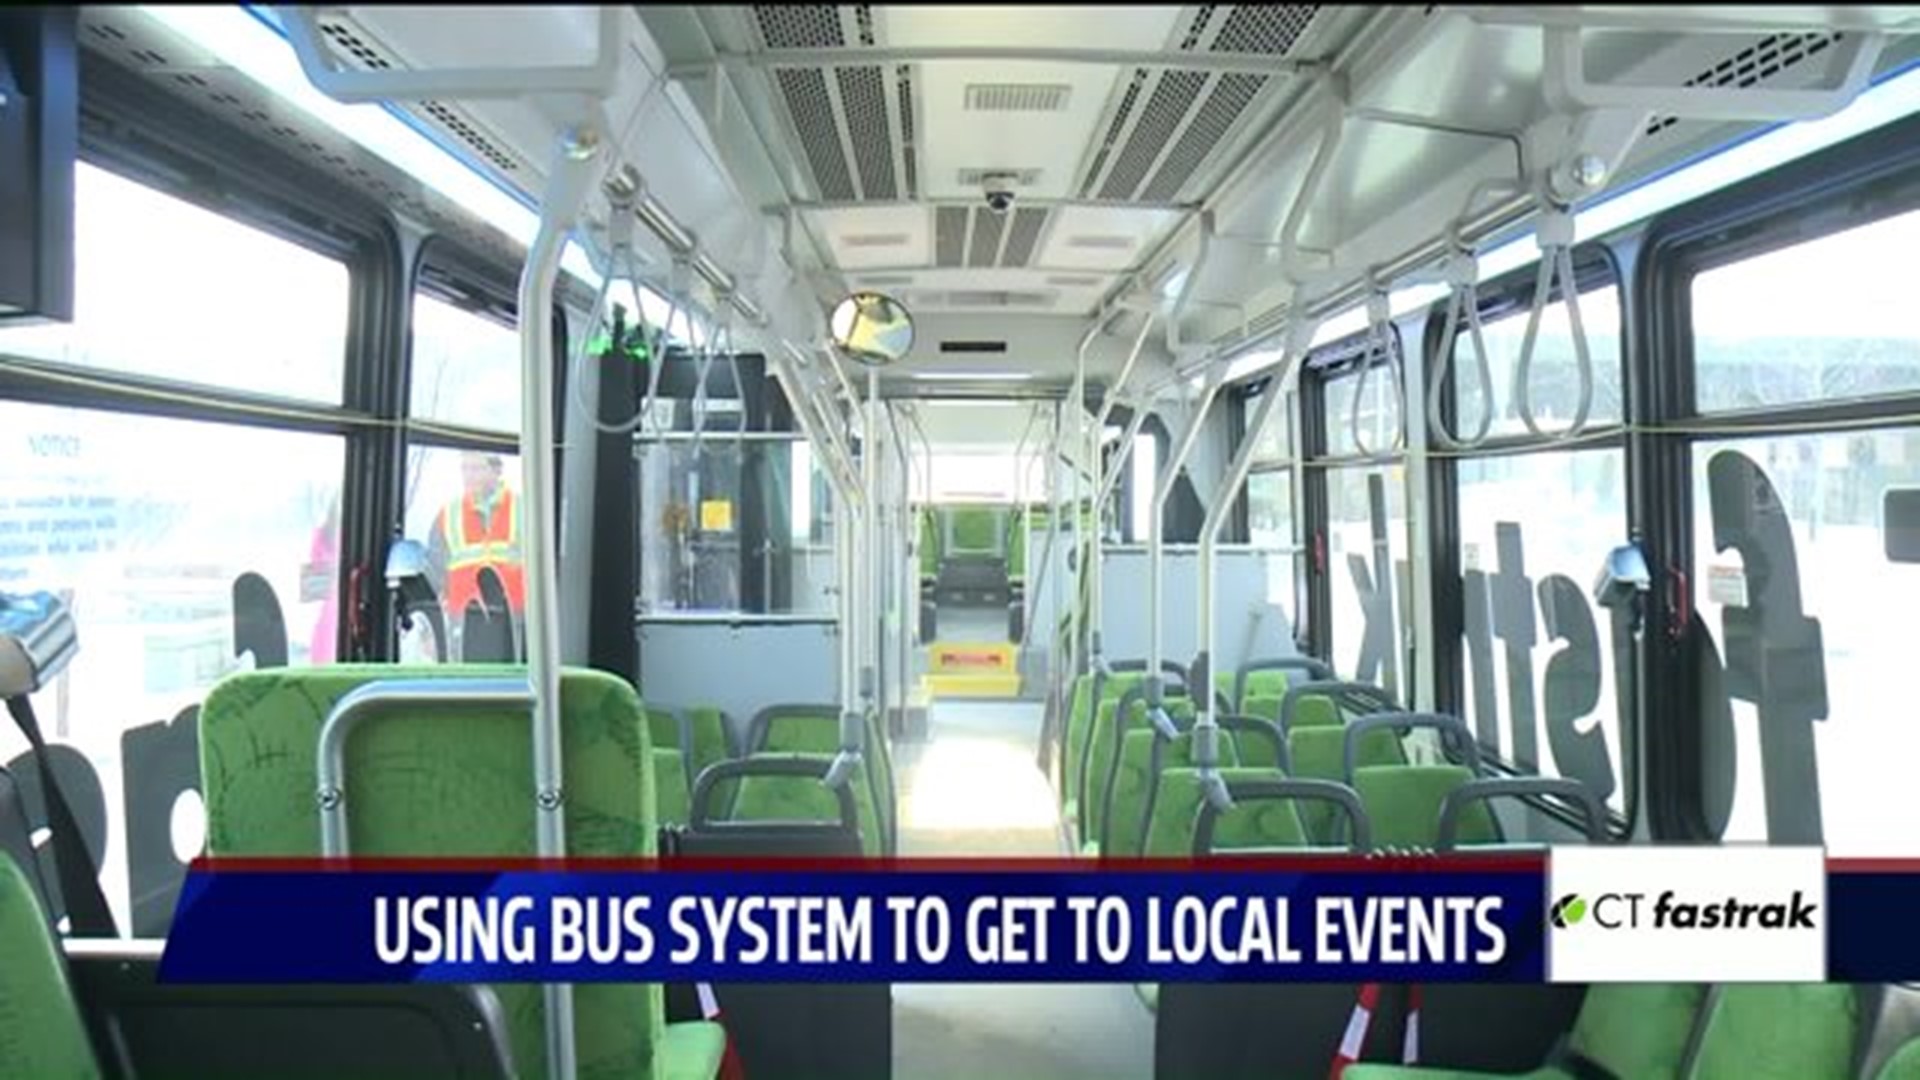 Using CTfastrak to get to local events